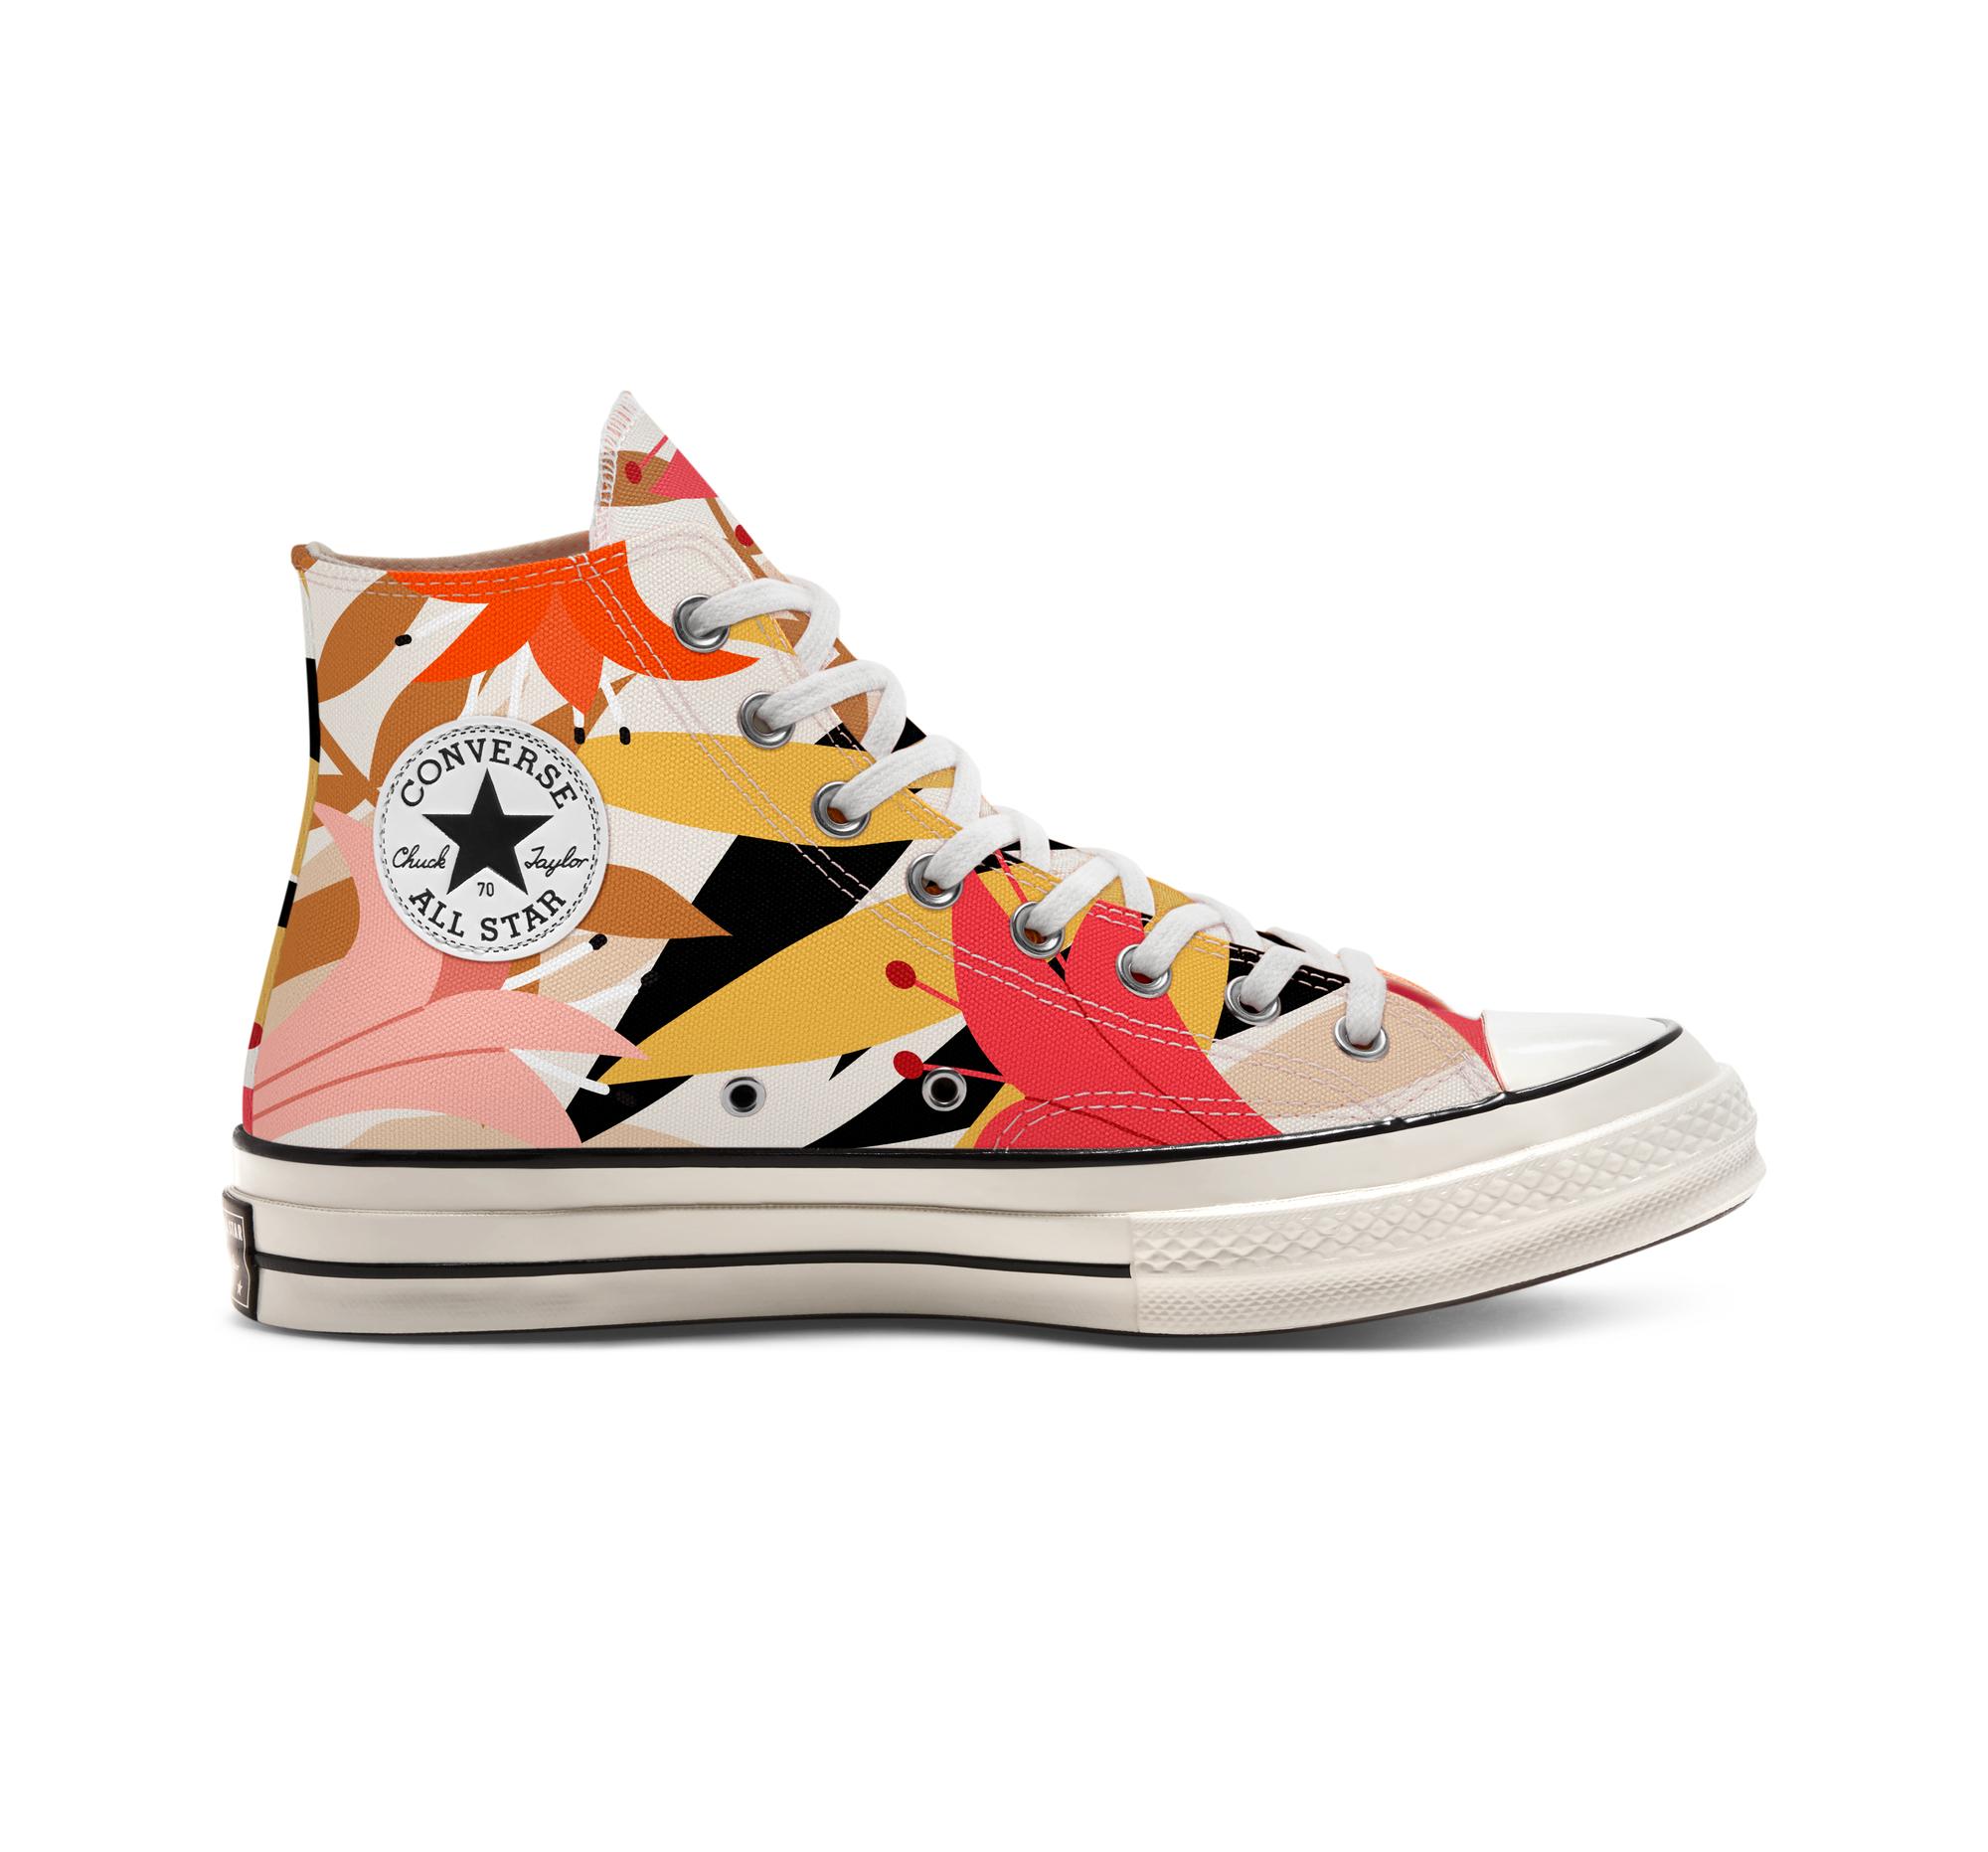 Converse Canvas Vintage Floral Chuck 70 High Top in Orange (Pink) - Lyst